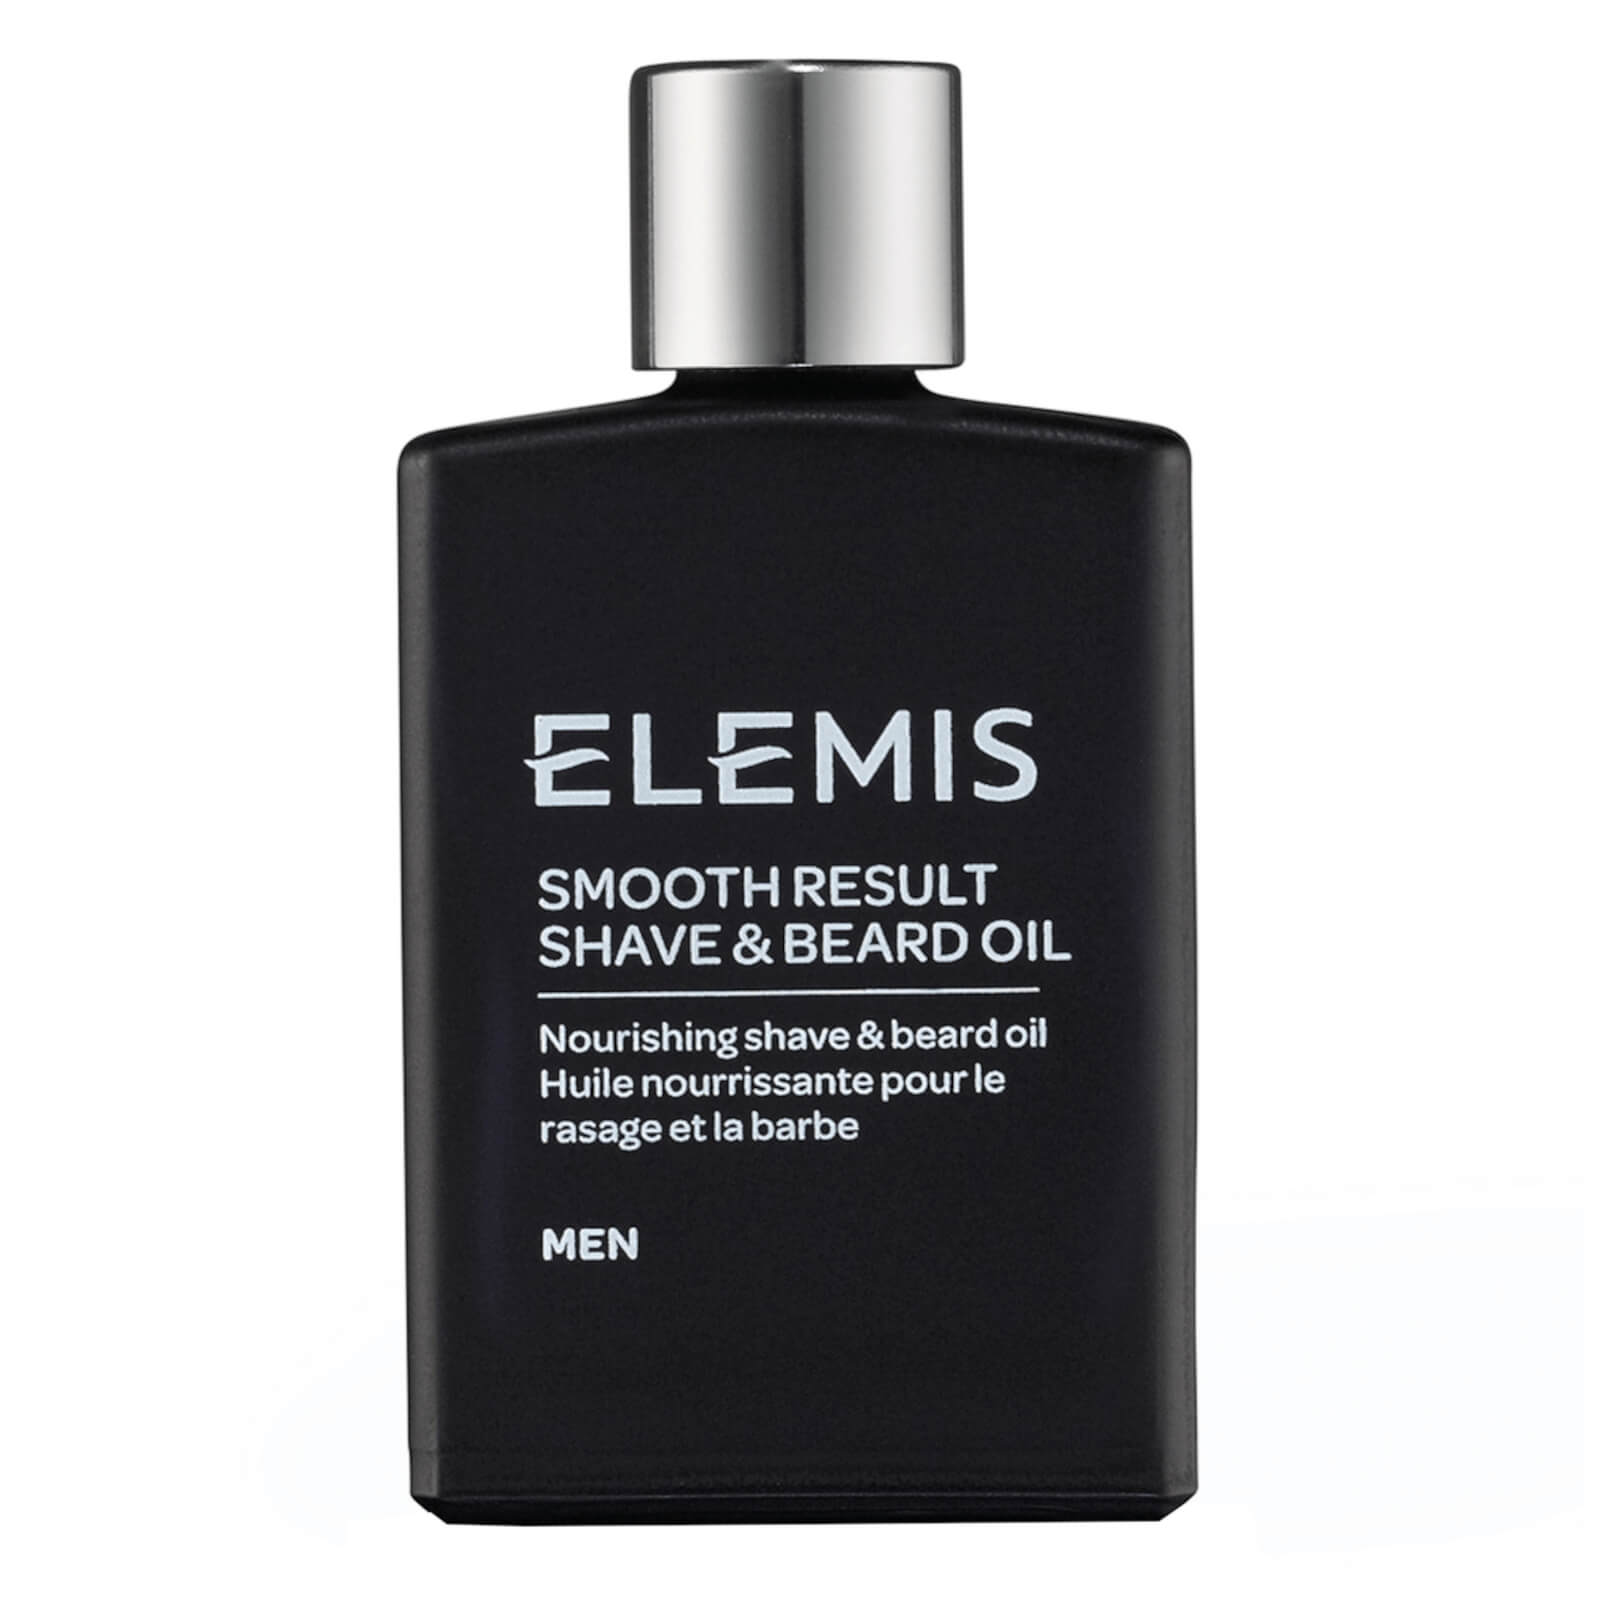 Smooth Result Shave & Beard Oil